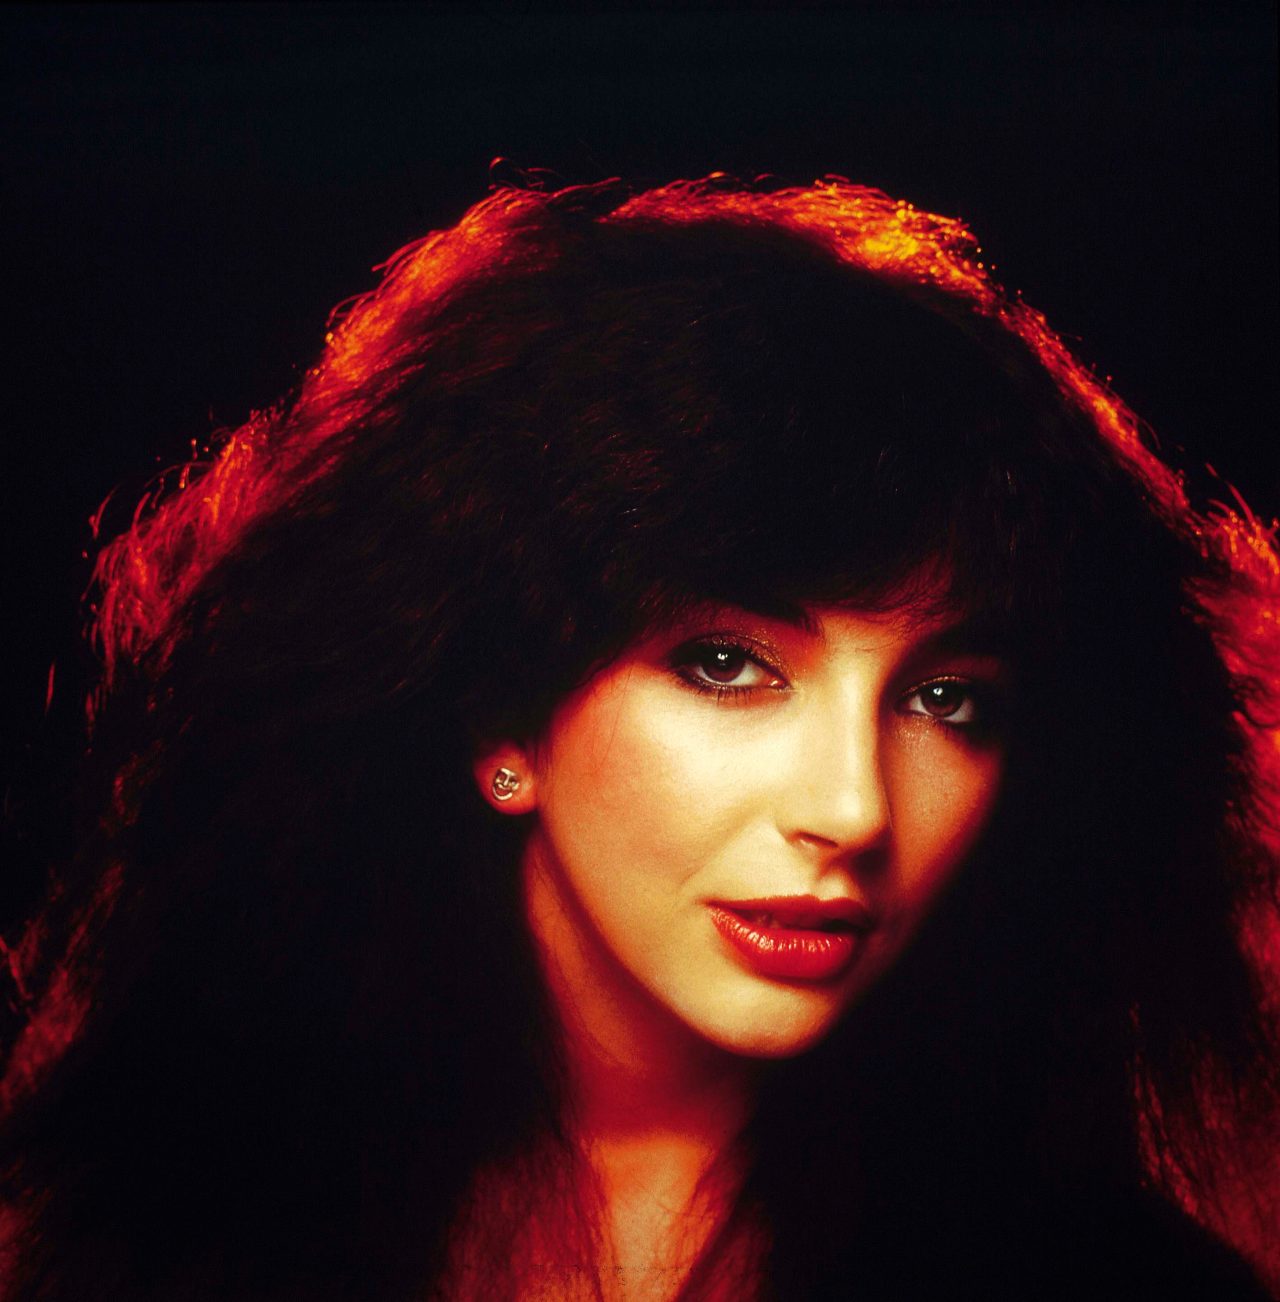 UNSPECIFIED - JANUARY 01:  Photo of Kate BUSH  (Photo by RB/Redferns)